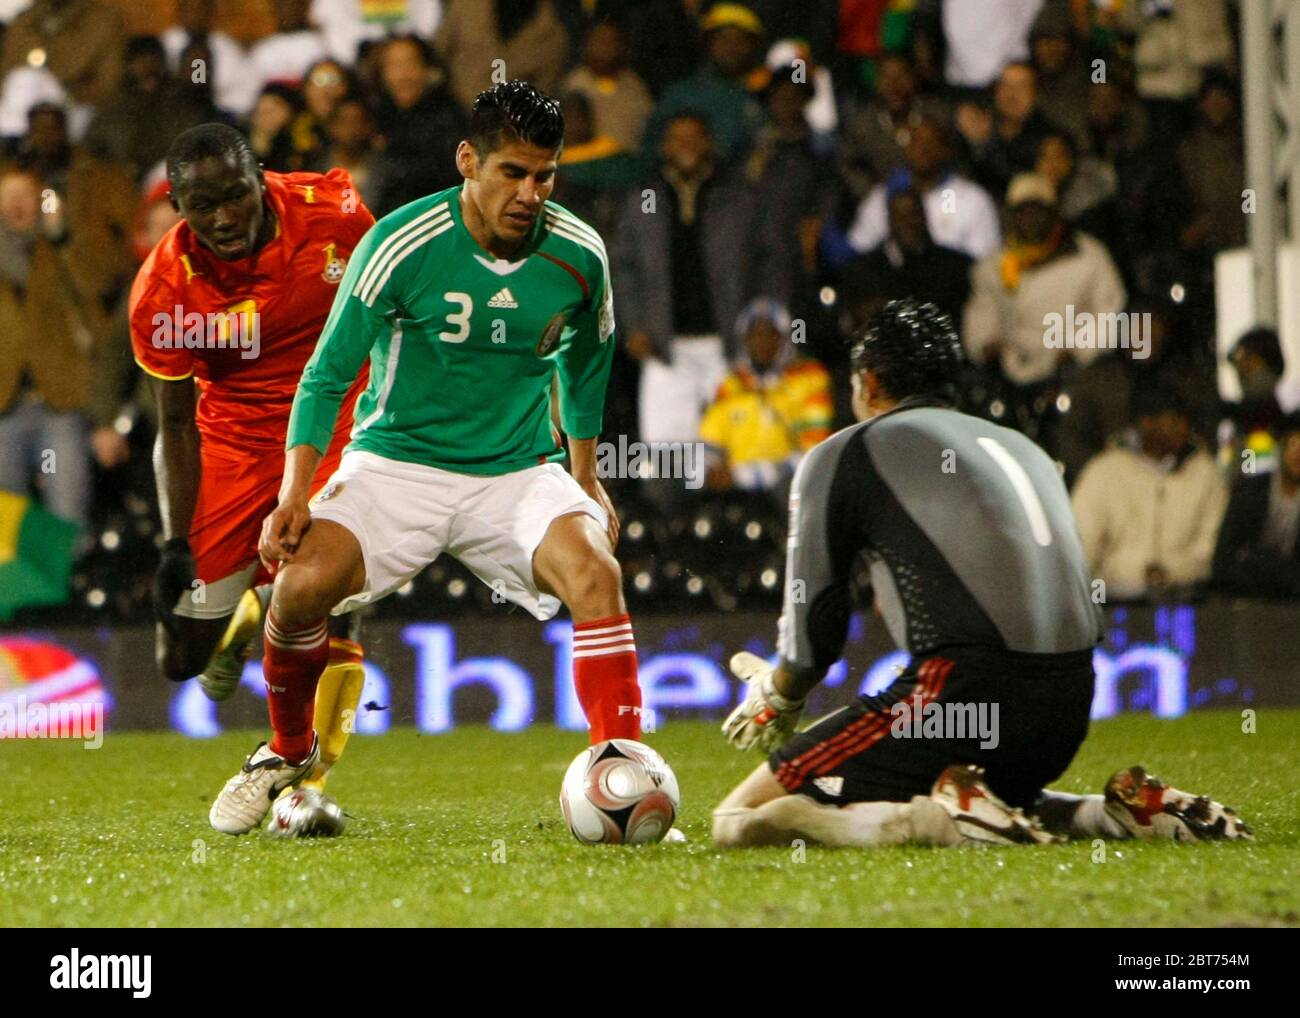 LONDON, UK. MARCH 26: Mexico's Carlos Salcido sees the ball safely back to his keeper Oswaldo Sanchez during International Friendly between Mexico Cit Stock Photo